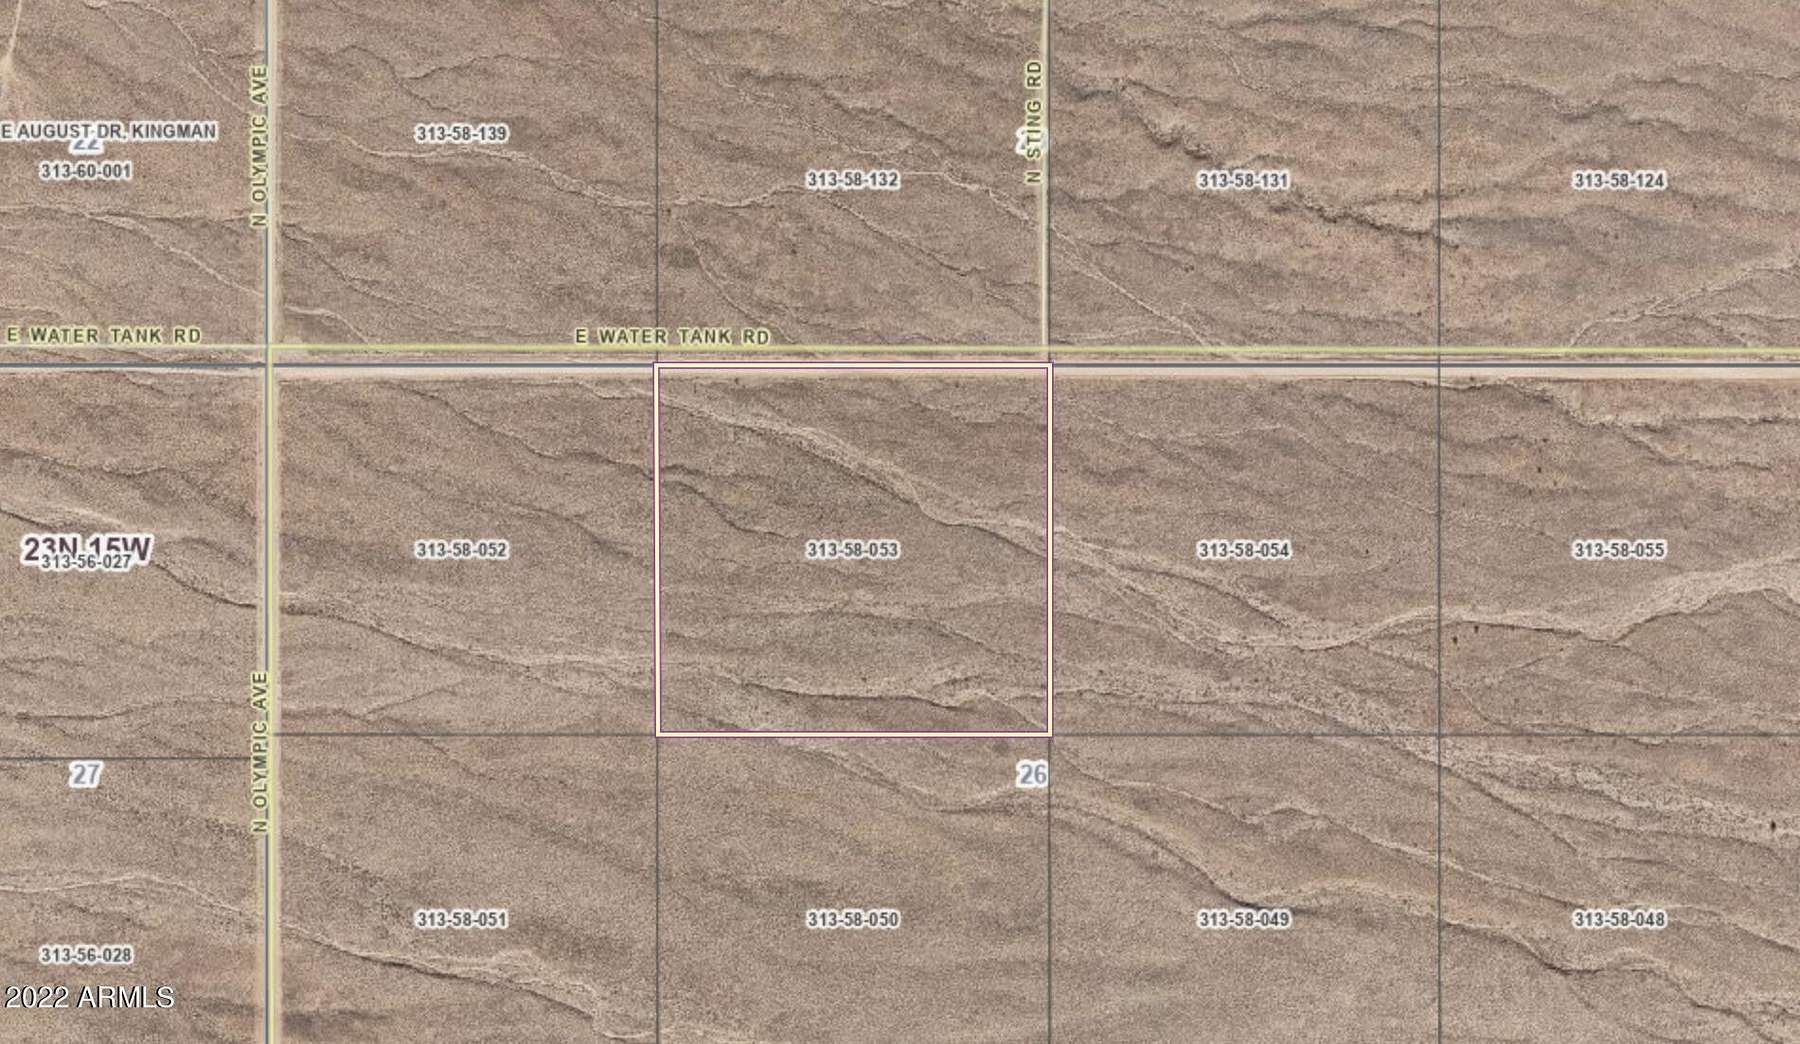 37.8 Acres of Mixed-Use Land for Sale in Kingman, Arizona